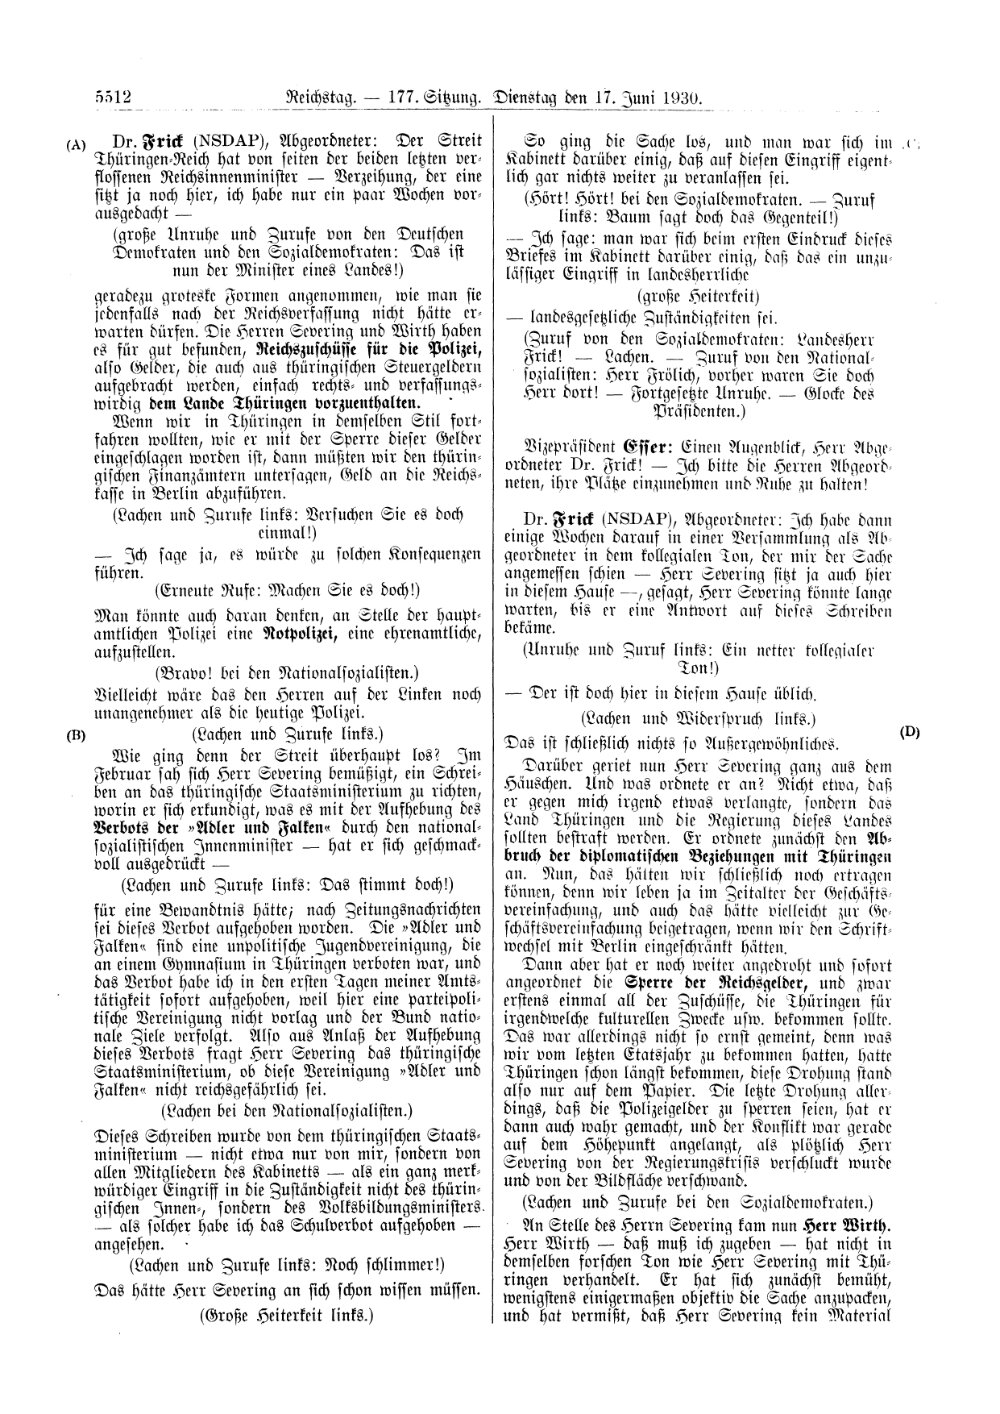 Scan of page 5512